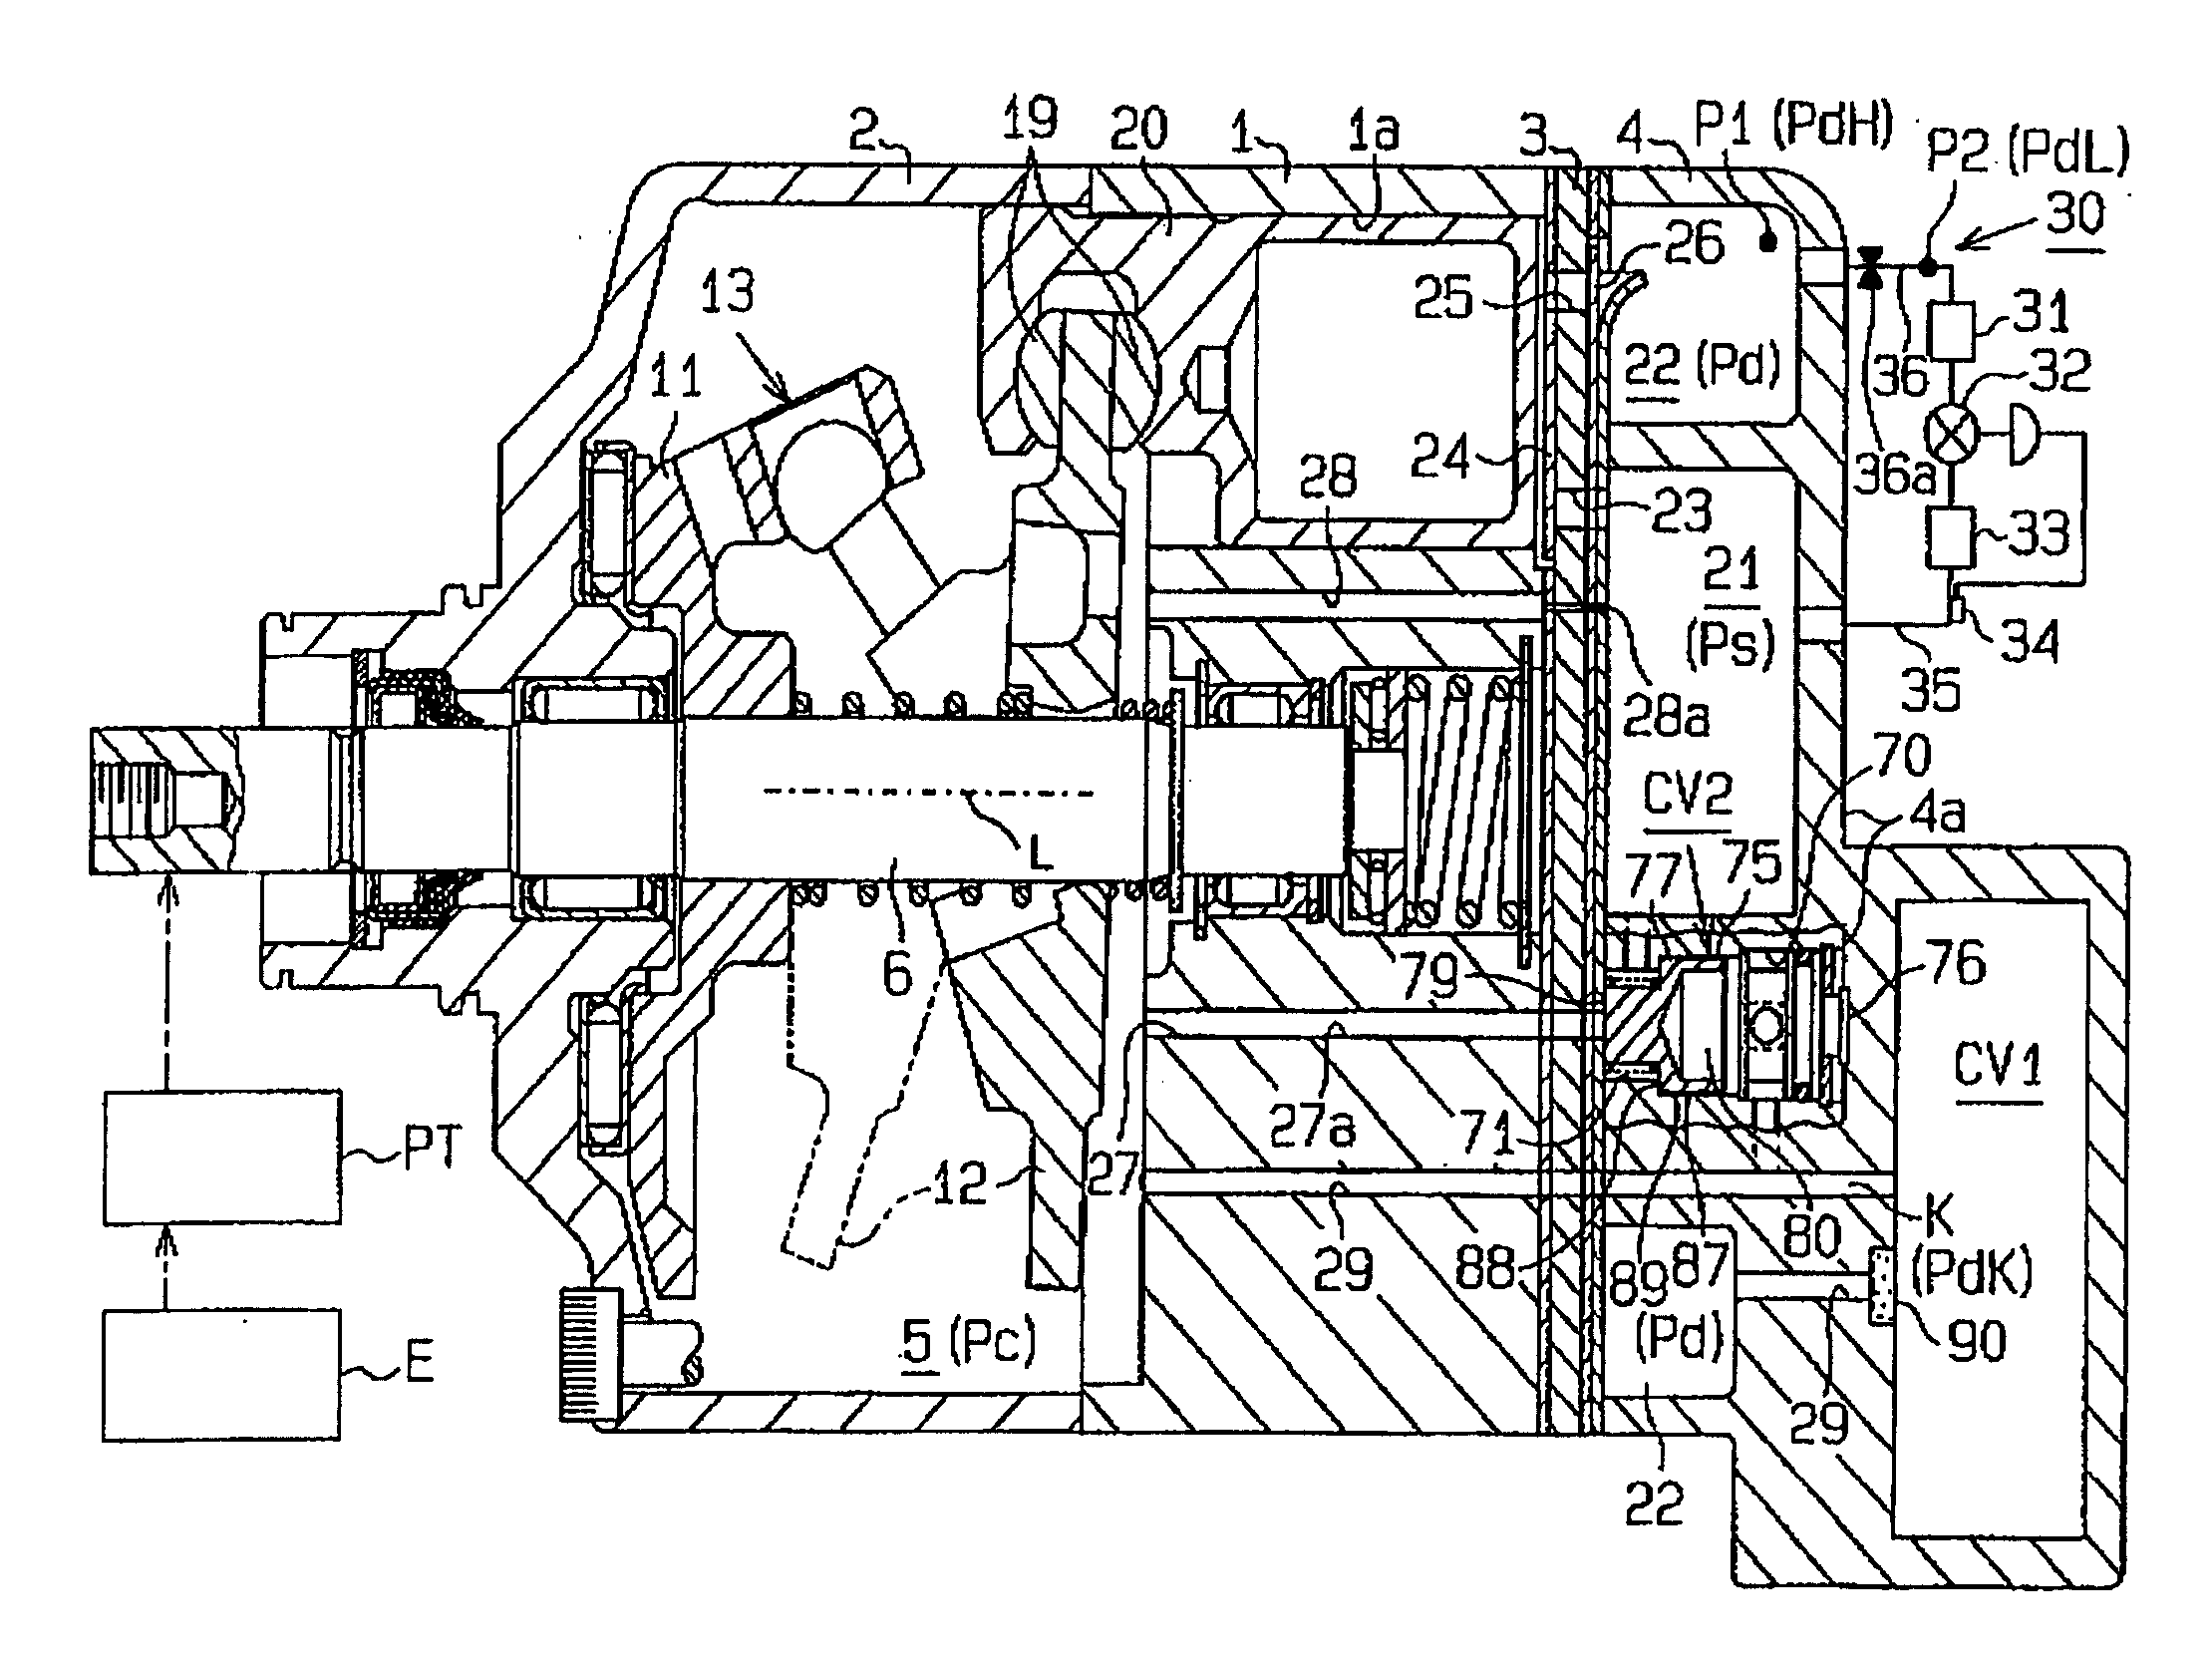 Displacement control mechanism for variable displacement compressor